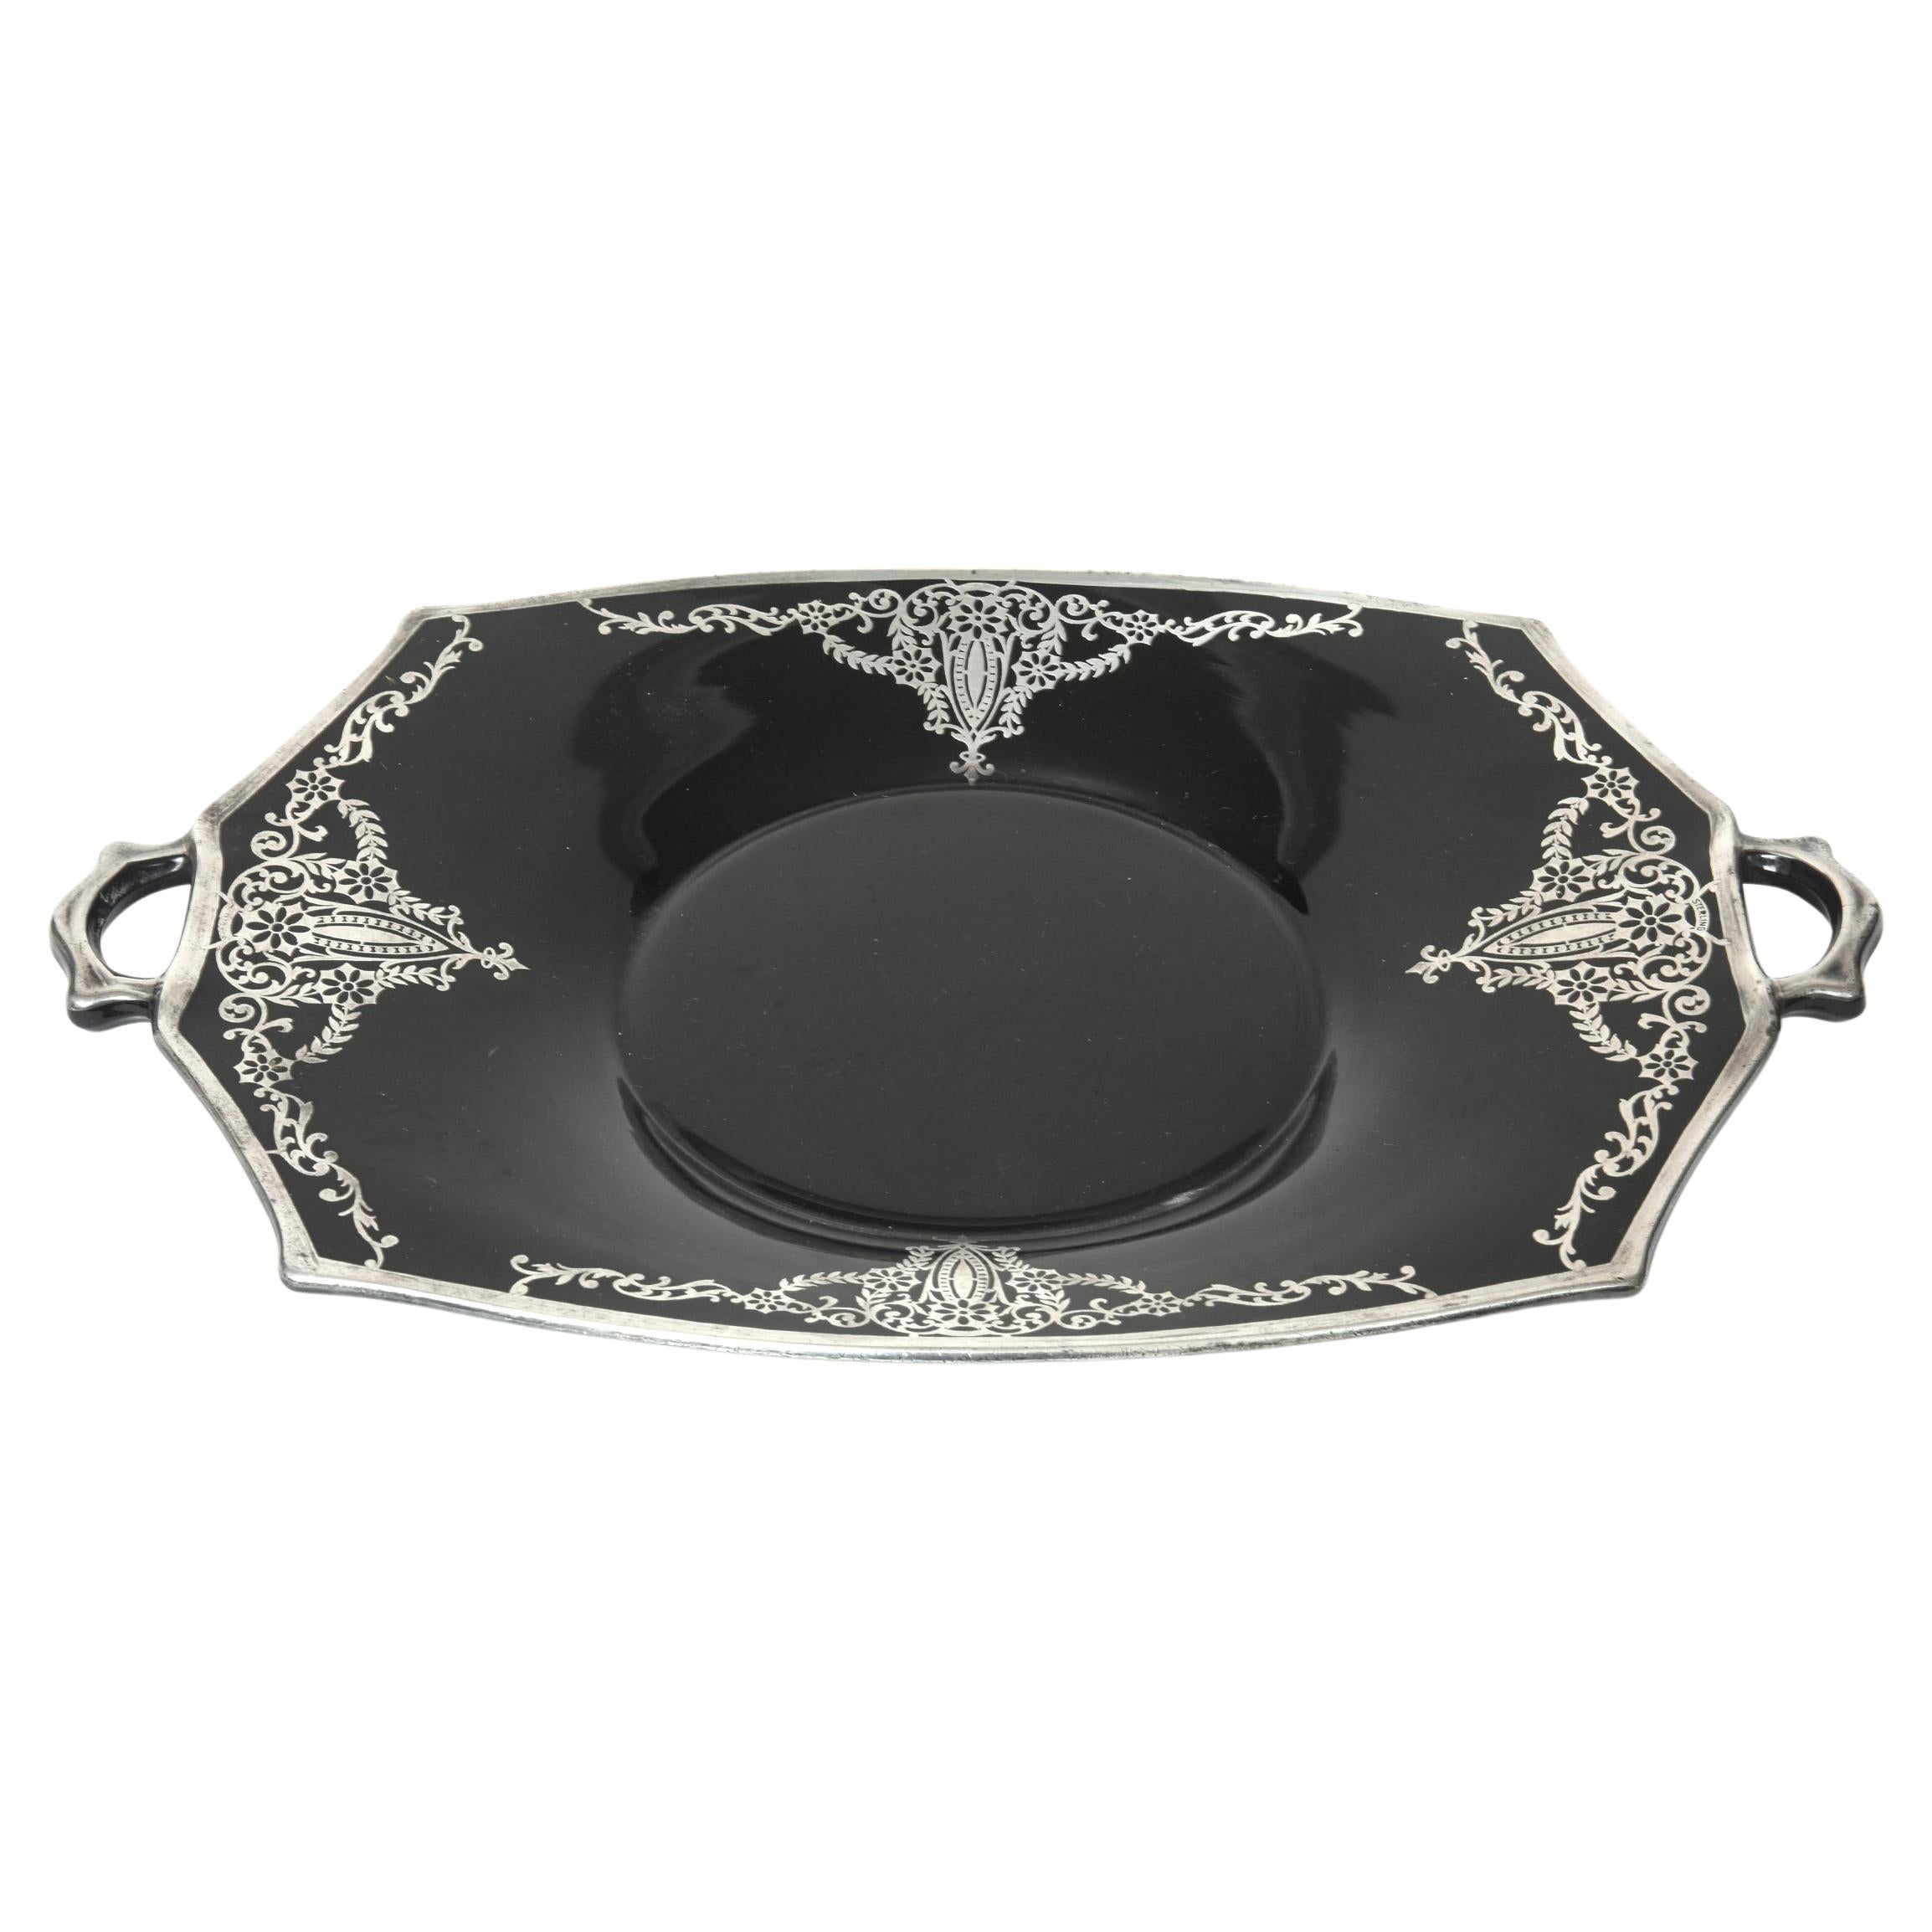 Floral Sterling Silver Overlay Black Amethyst Glass Handled Serving Tray